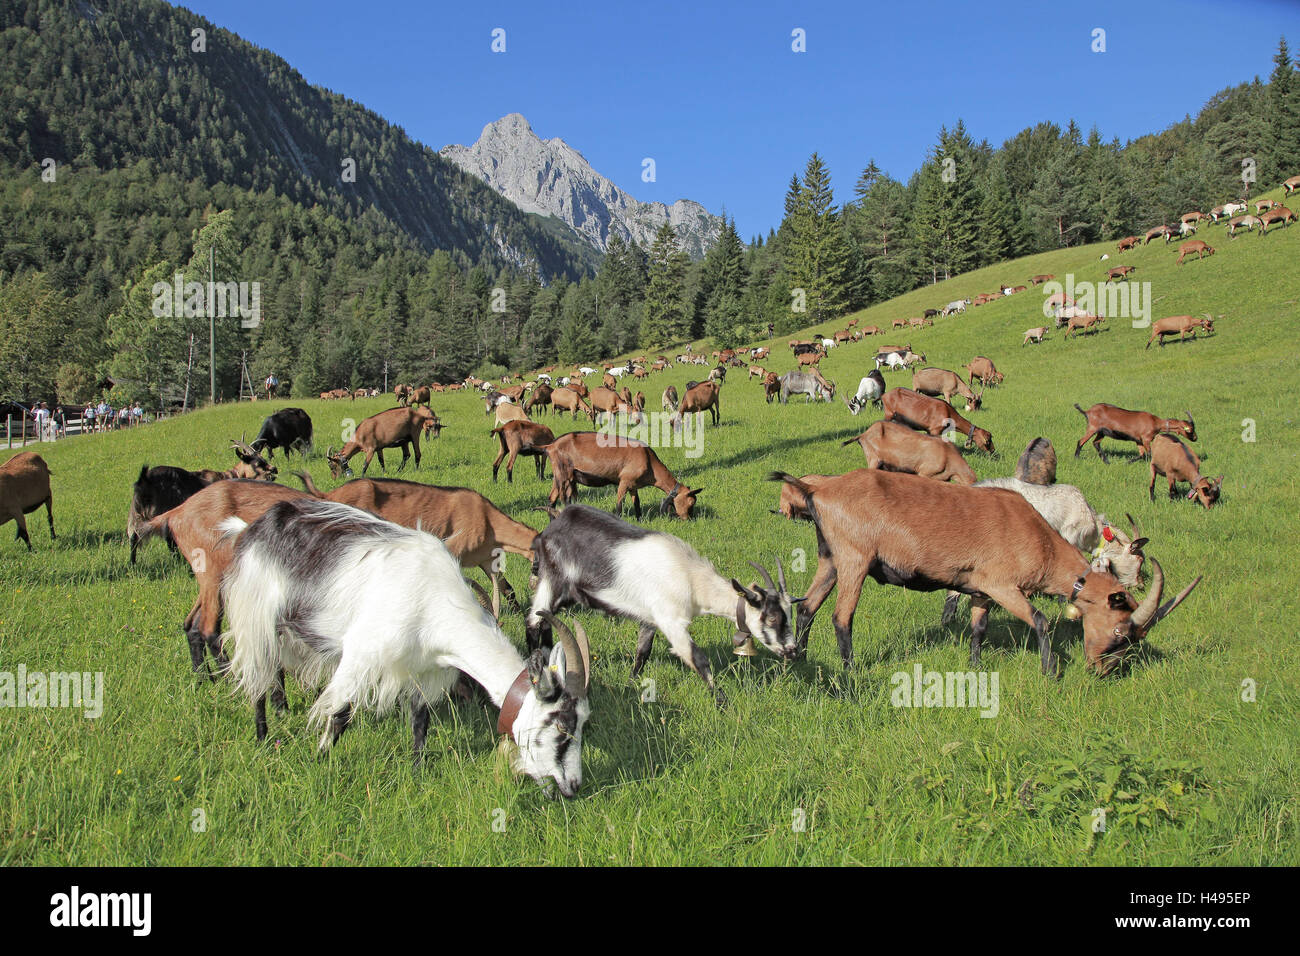 Mountain pasture, goat focuses, graze, mountain, edge the forest, Germany, Bavaria, Upper Bavaria, scenery, meadow, Alpine grassland, animals, benefit animals, pets, goats, billy goat, kid, brown, white, black, fur, many, several, eat, neckband, bells, ho Stock Photo